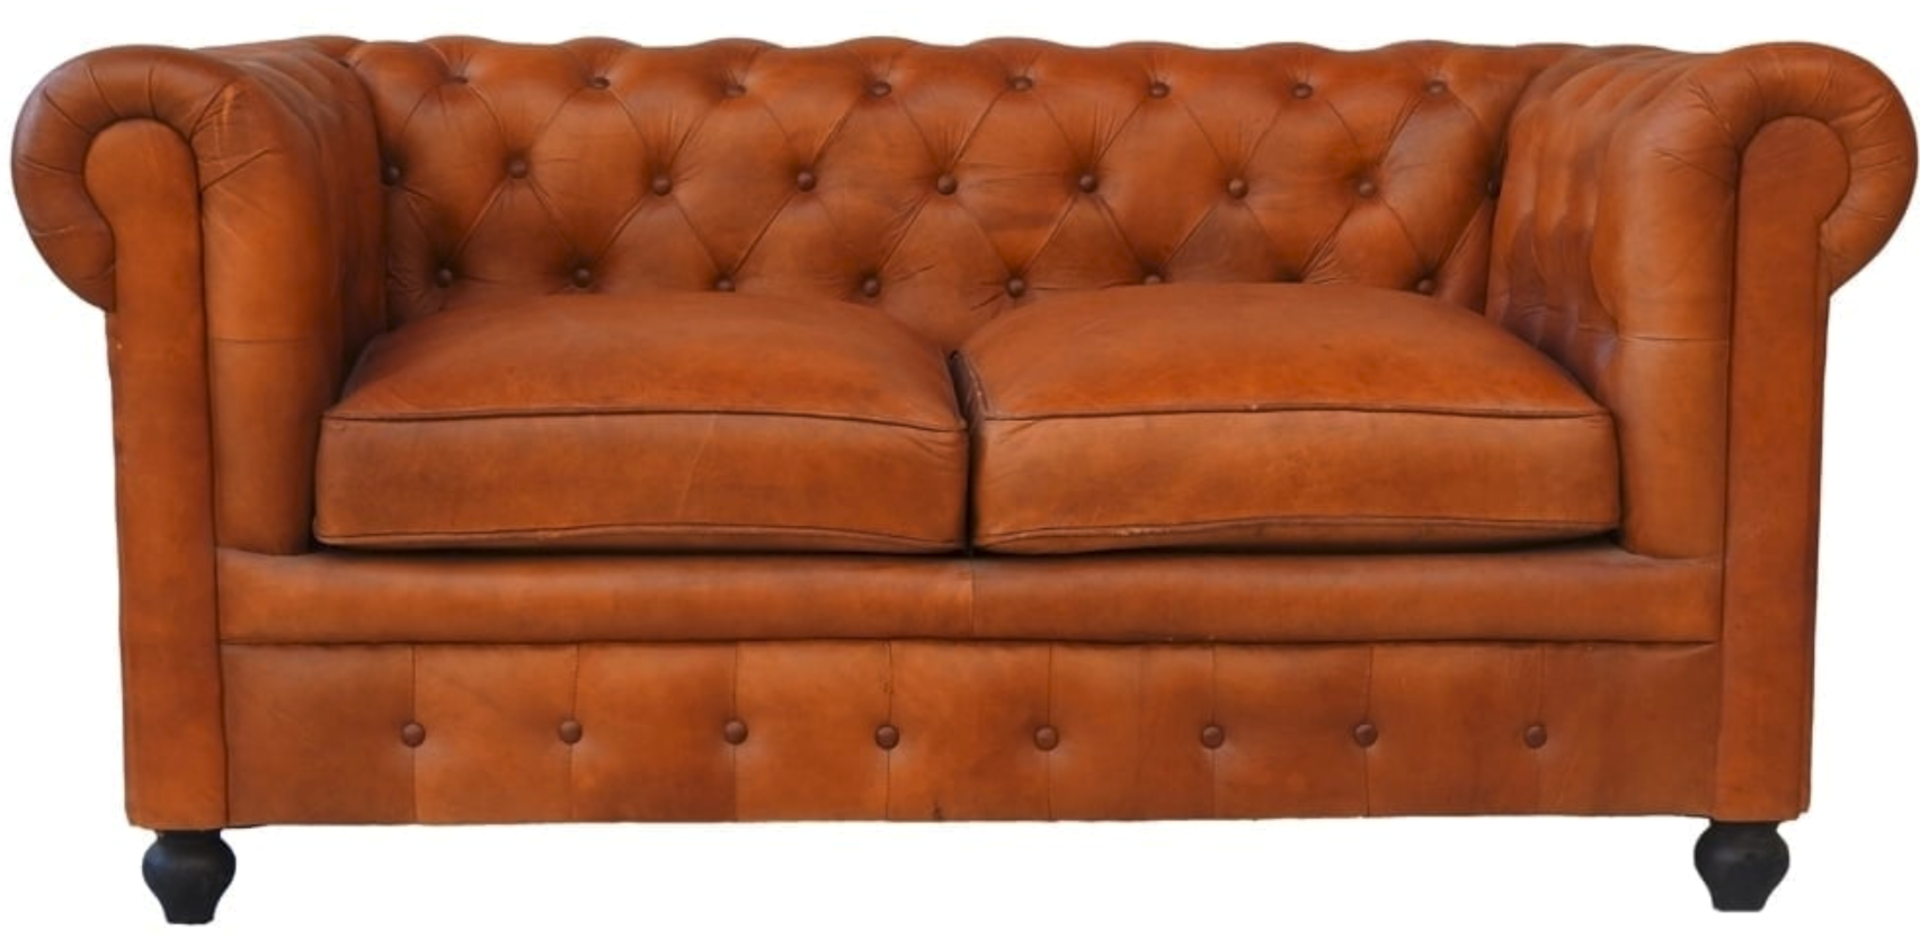 Shoreditch Leather Chesterfield 2-Seater Sofa Antique Tan - Image 2 of 2